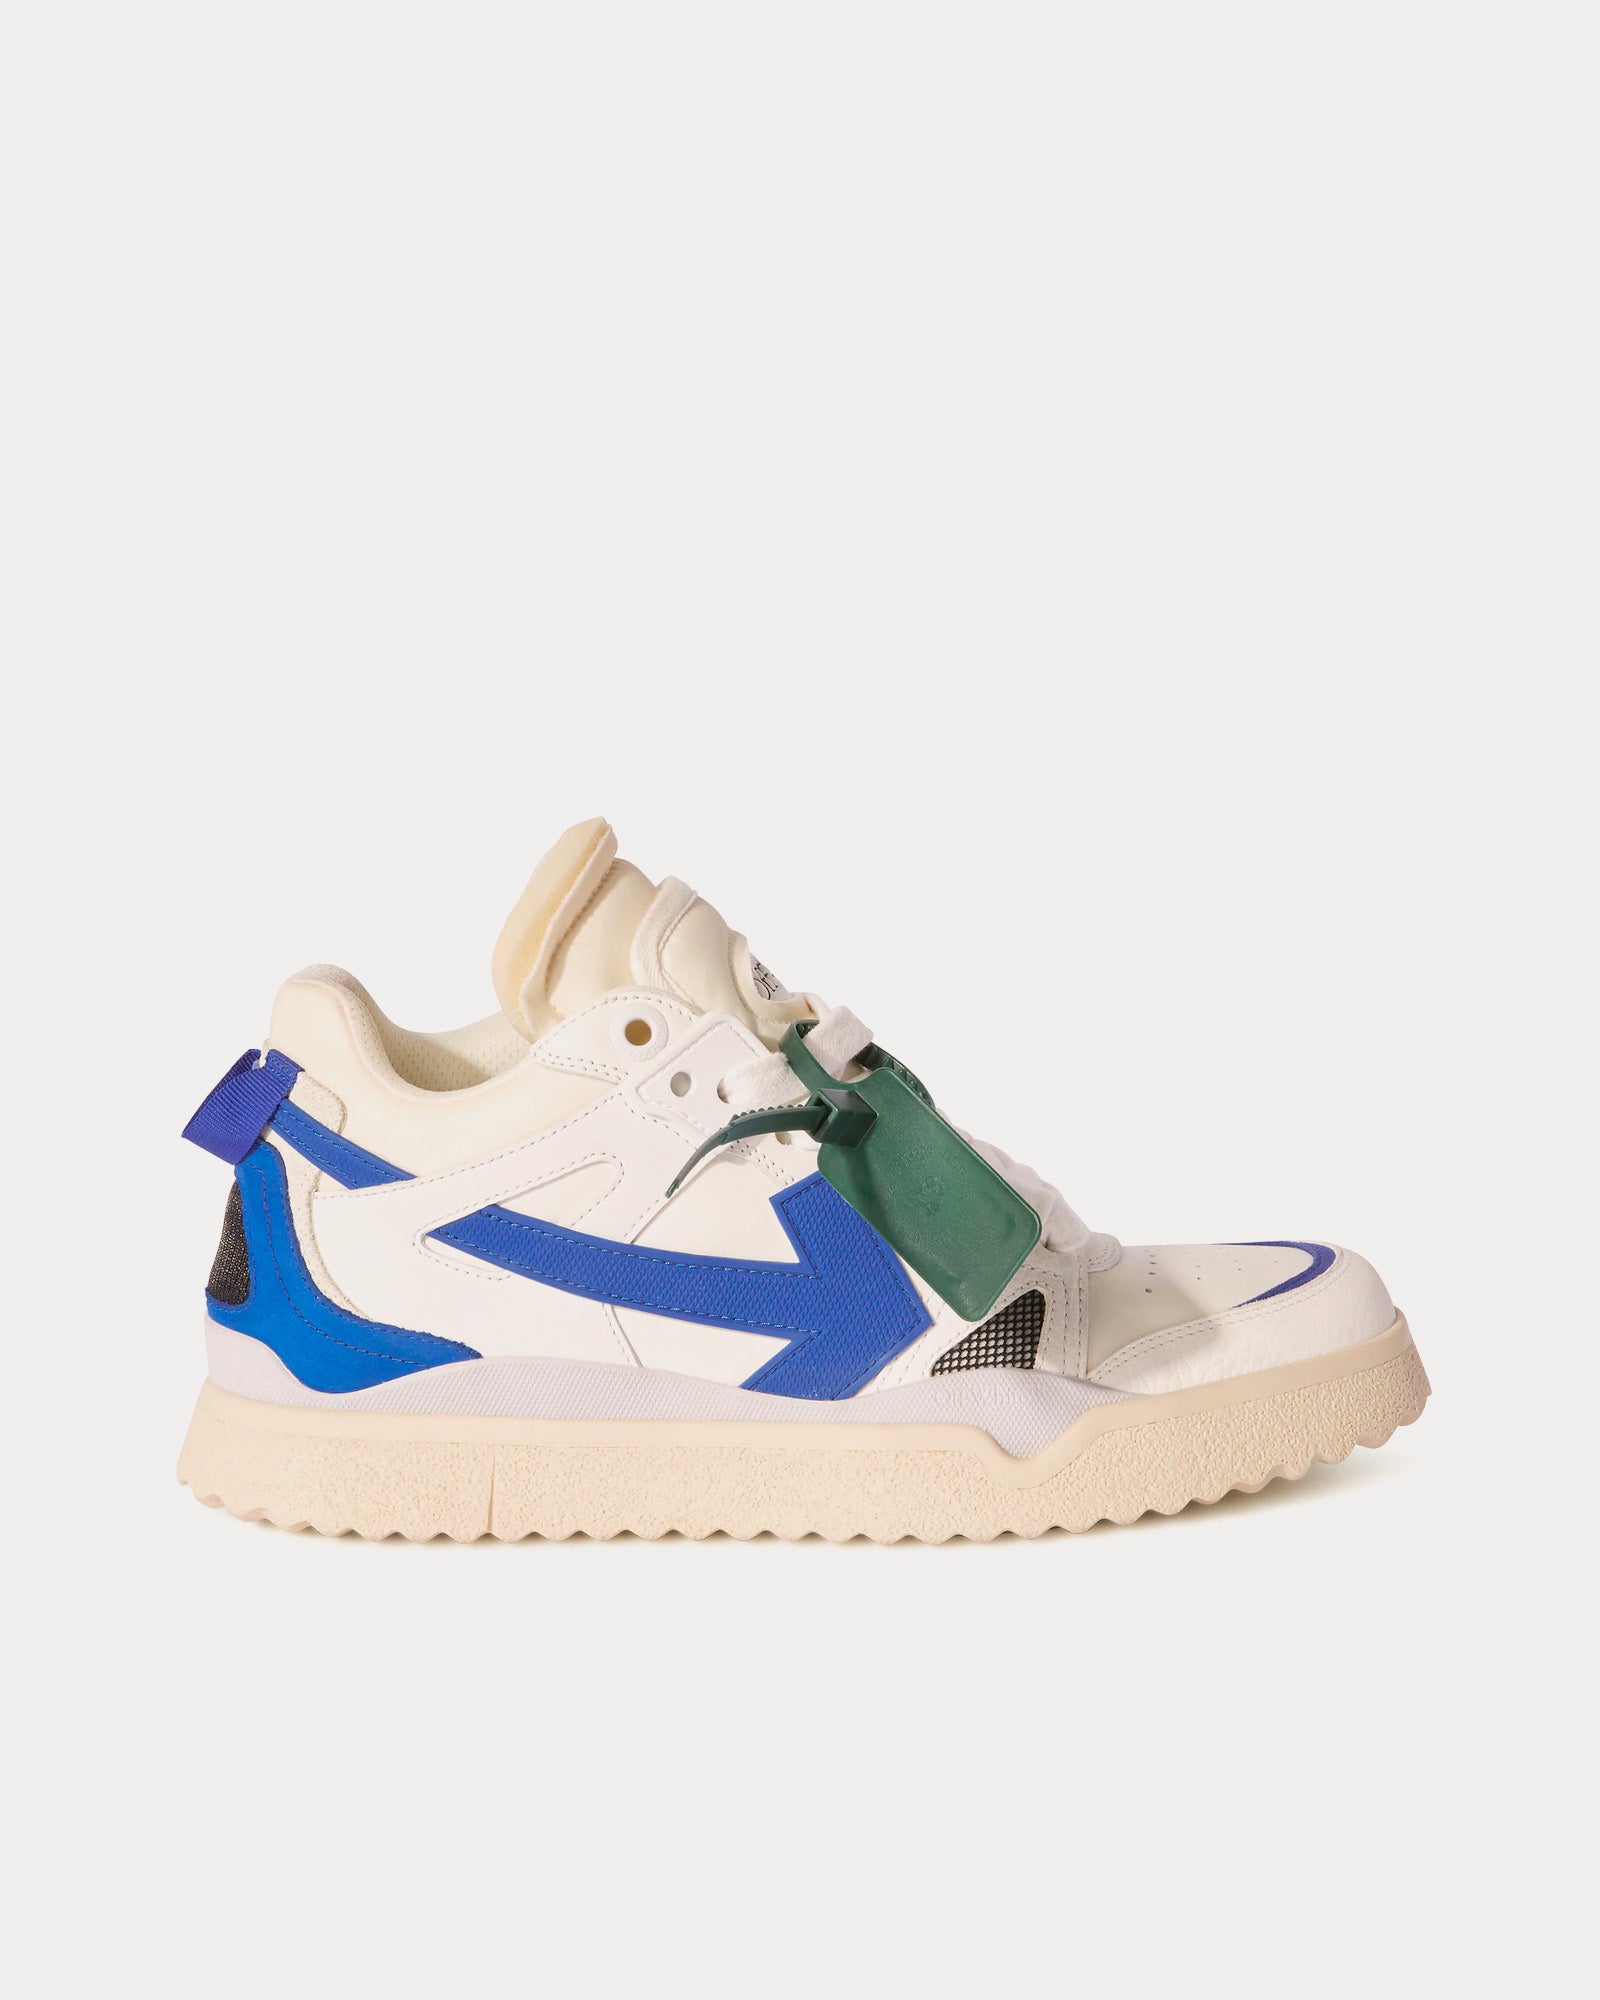 Out of Office Ombré Sneaker